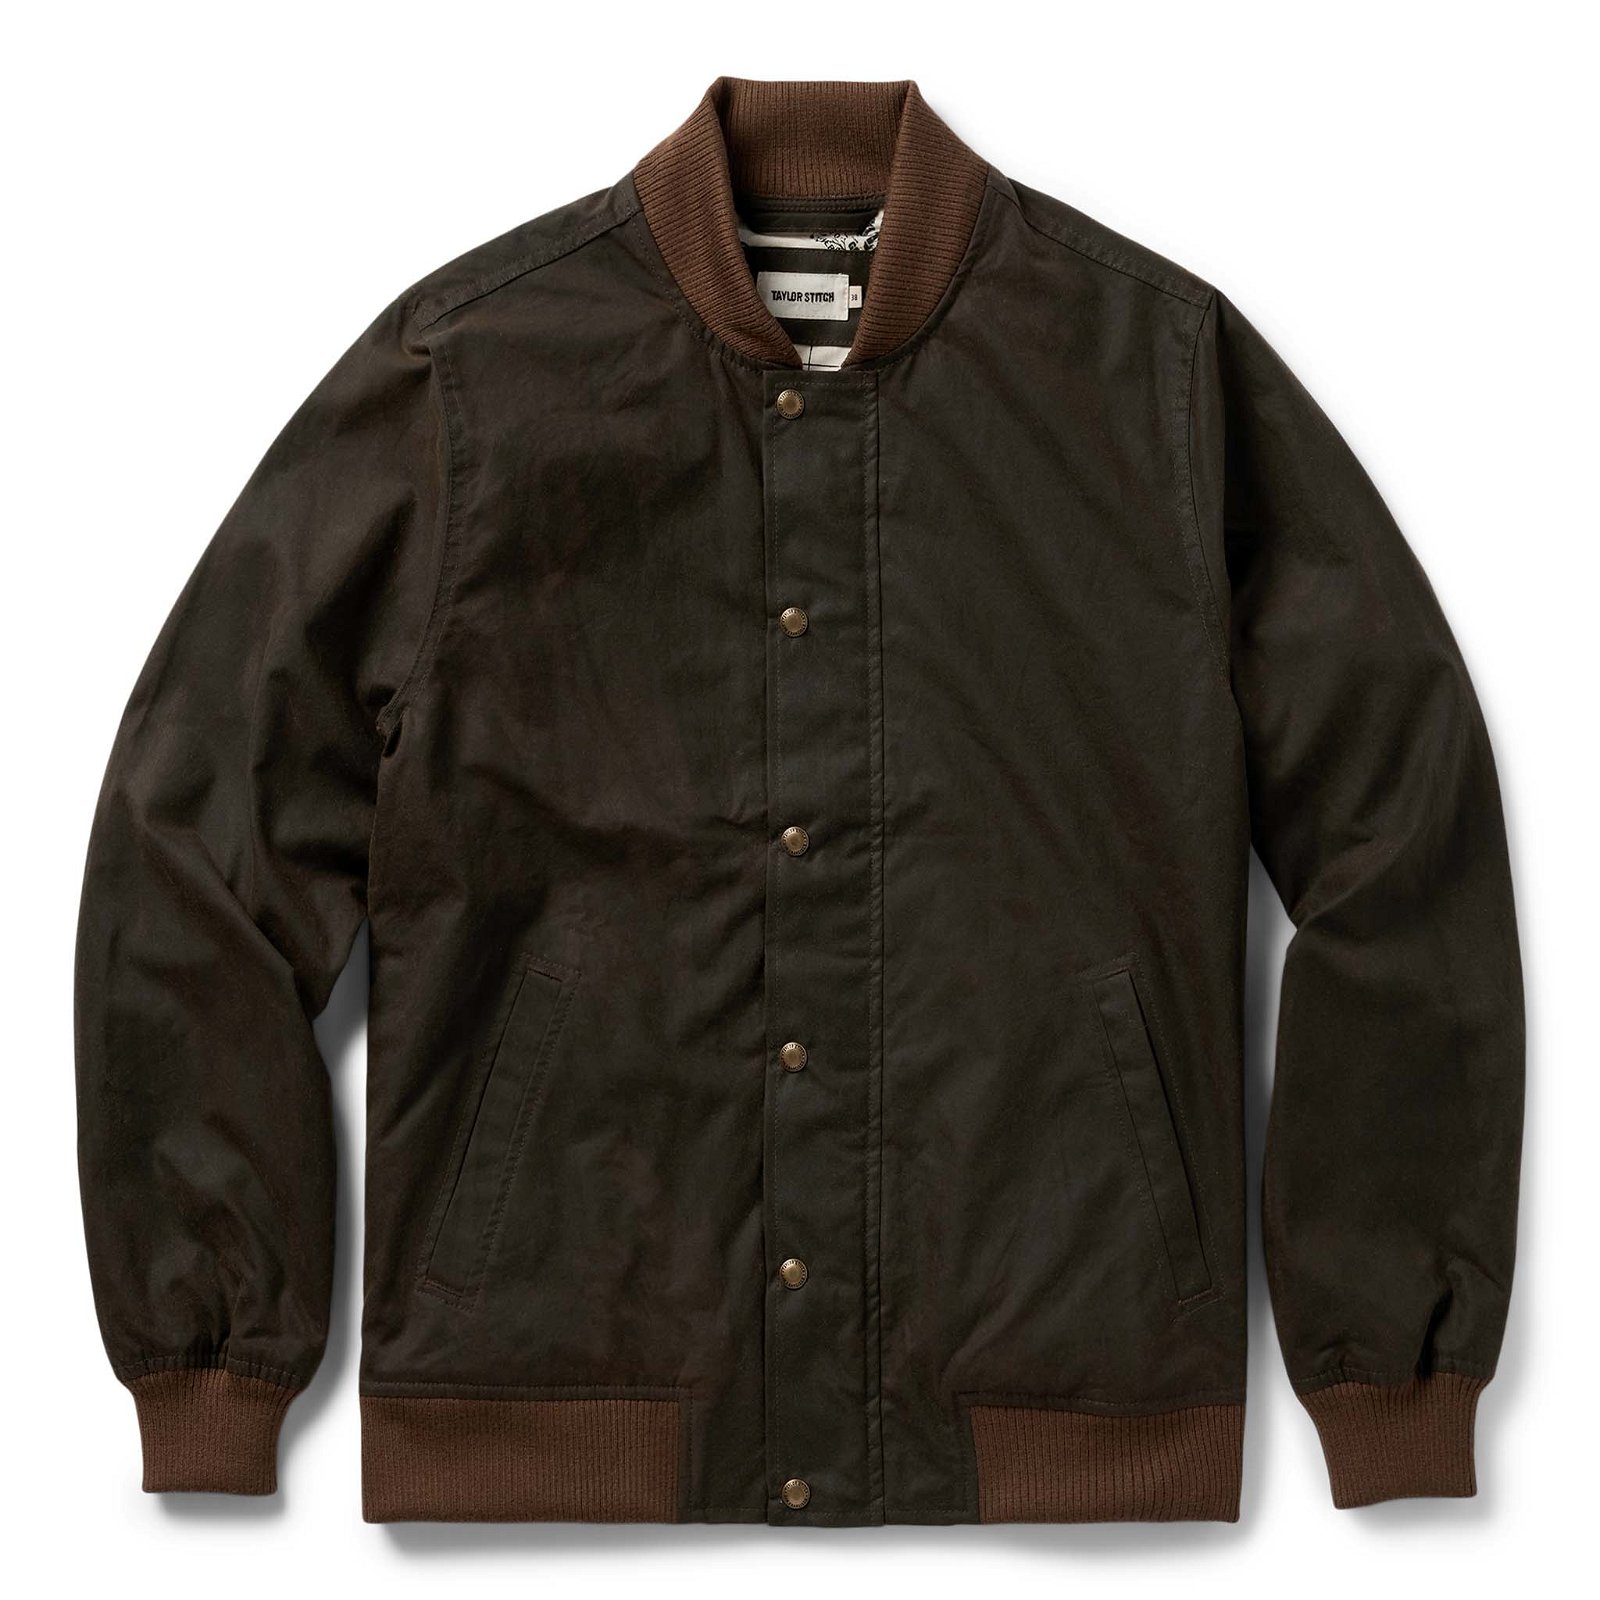 Image of The Bomber Jacket in Bark EverWax